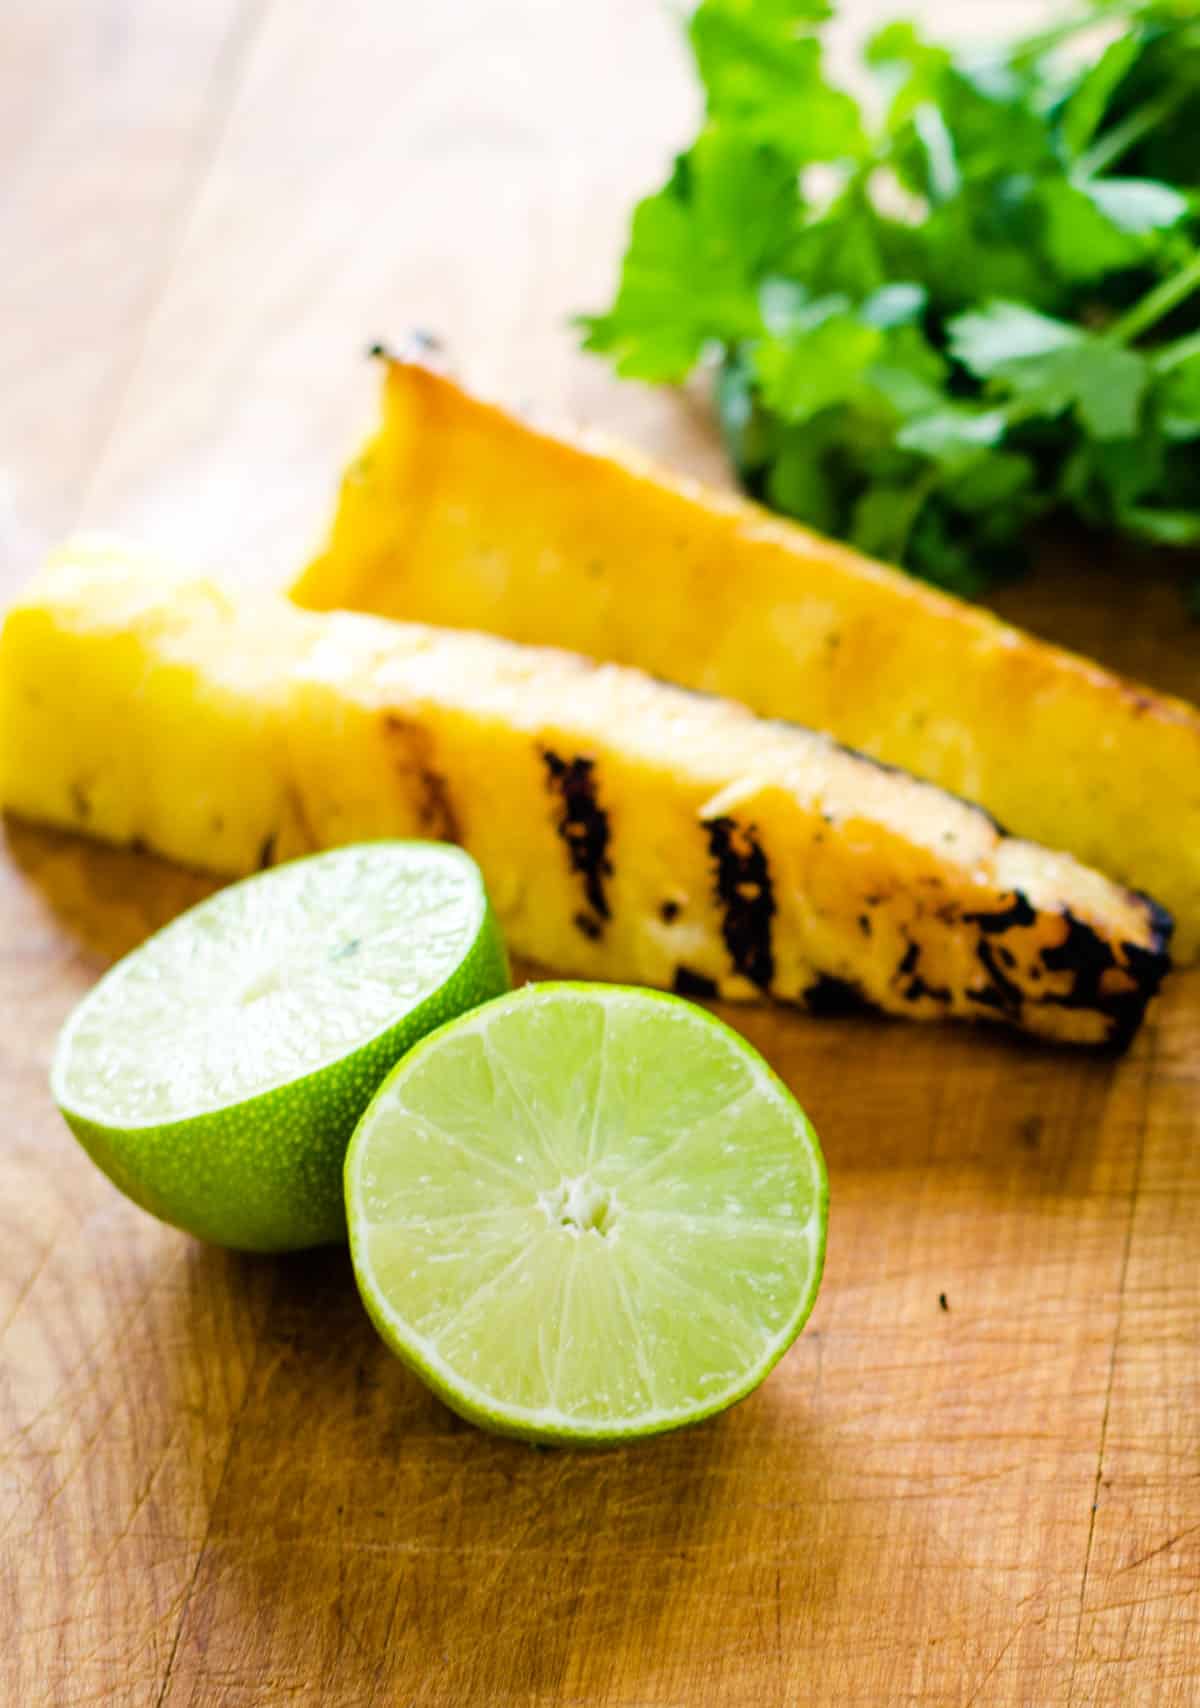 Limes, grilled pineapple, cilantro